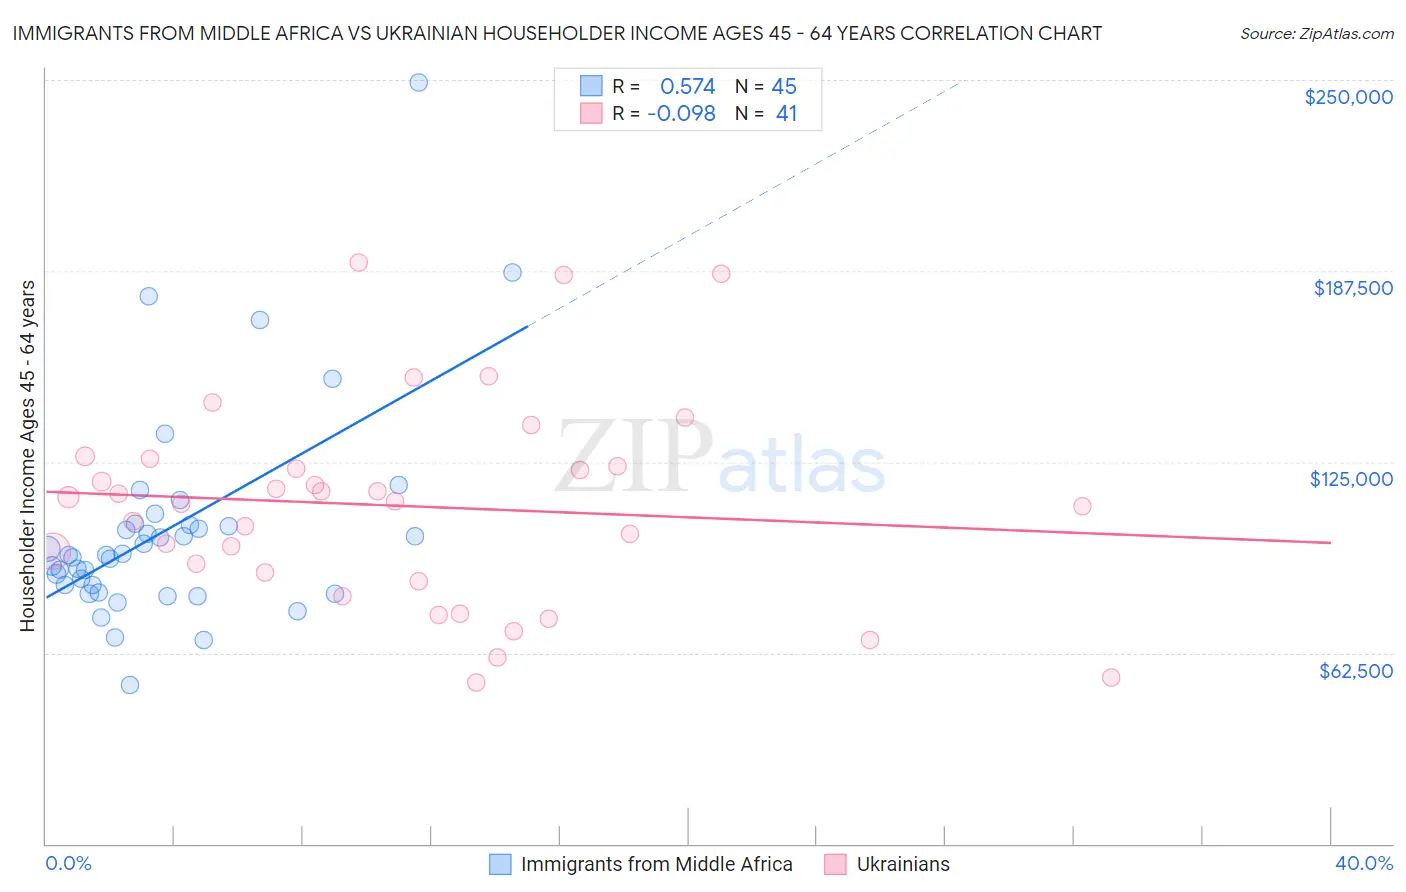 Immigrants from Middle Africa vs Ukrainian Householder Income Ages 45 - 64 years